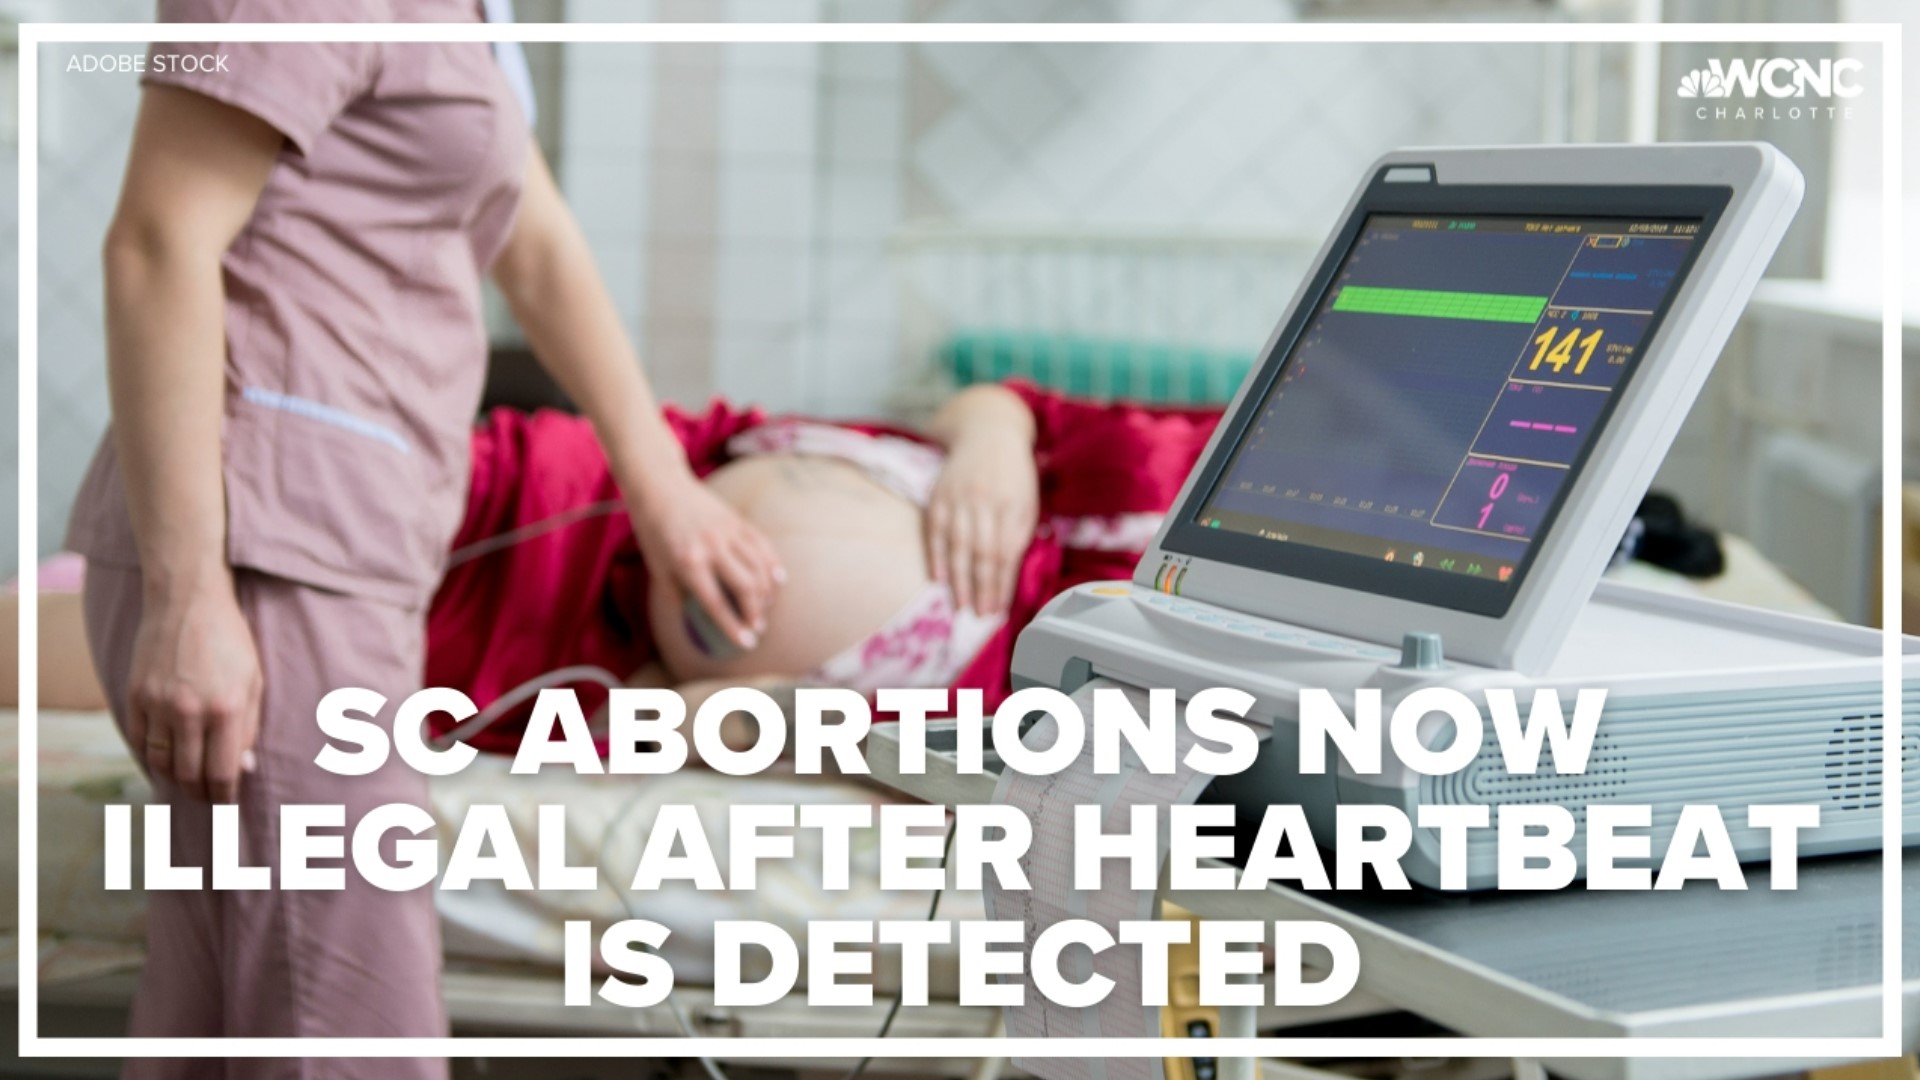 In South Carolina, it’s now illegal to have most abortions after a fetal heartbeat is detected, which is normally around six weeks.